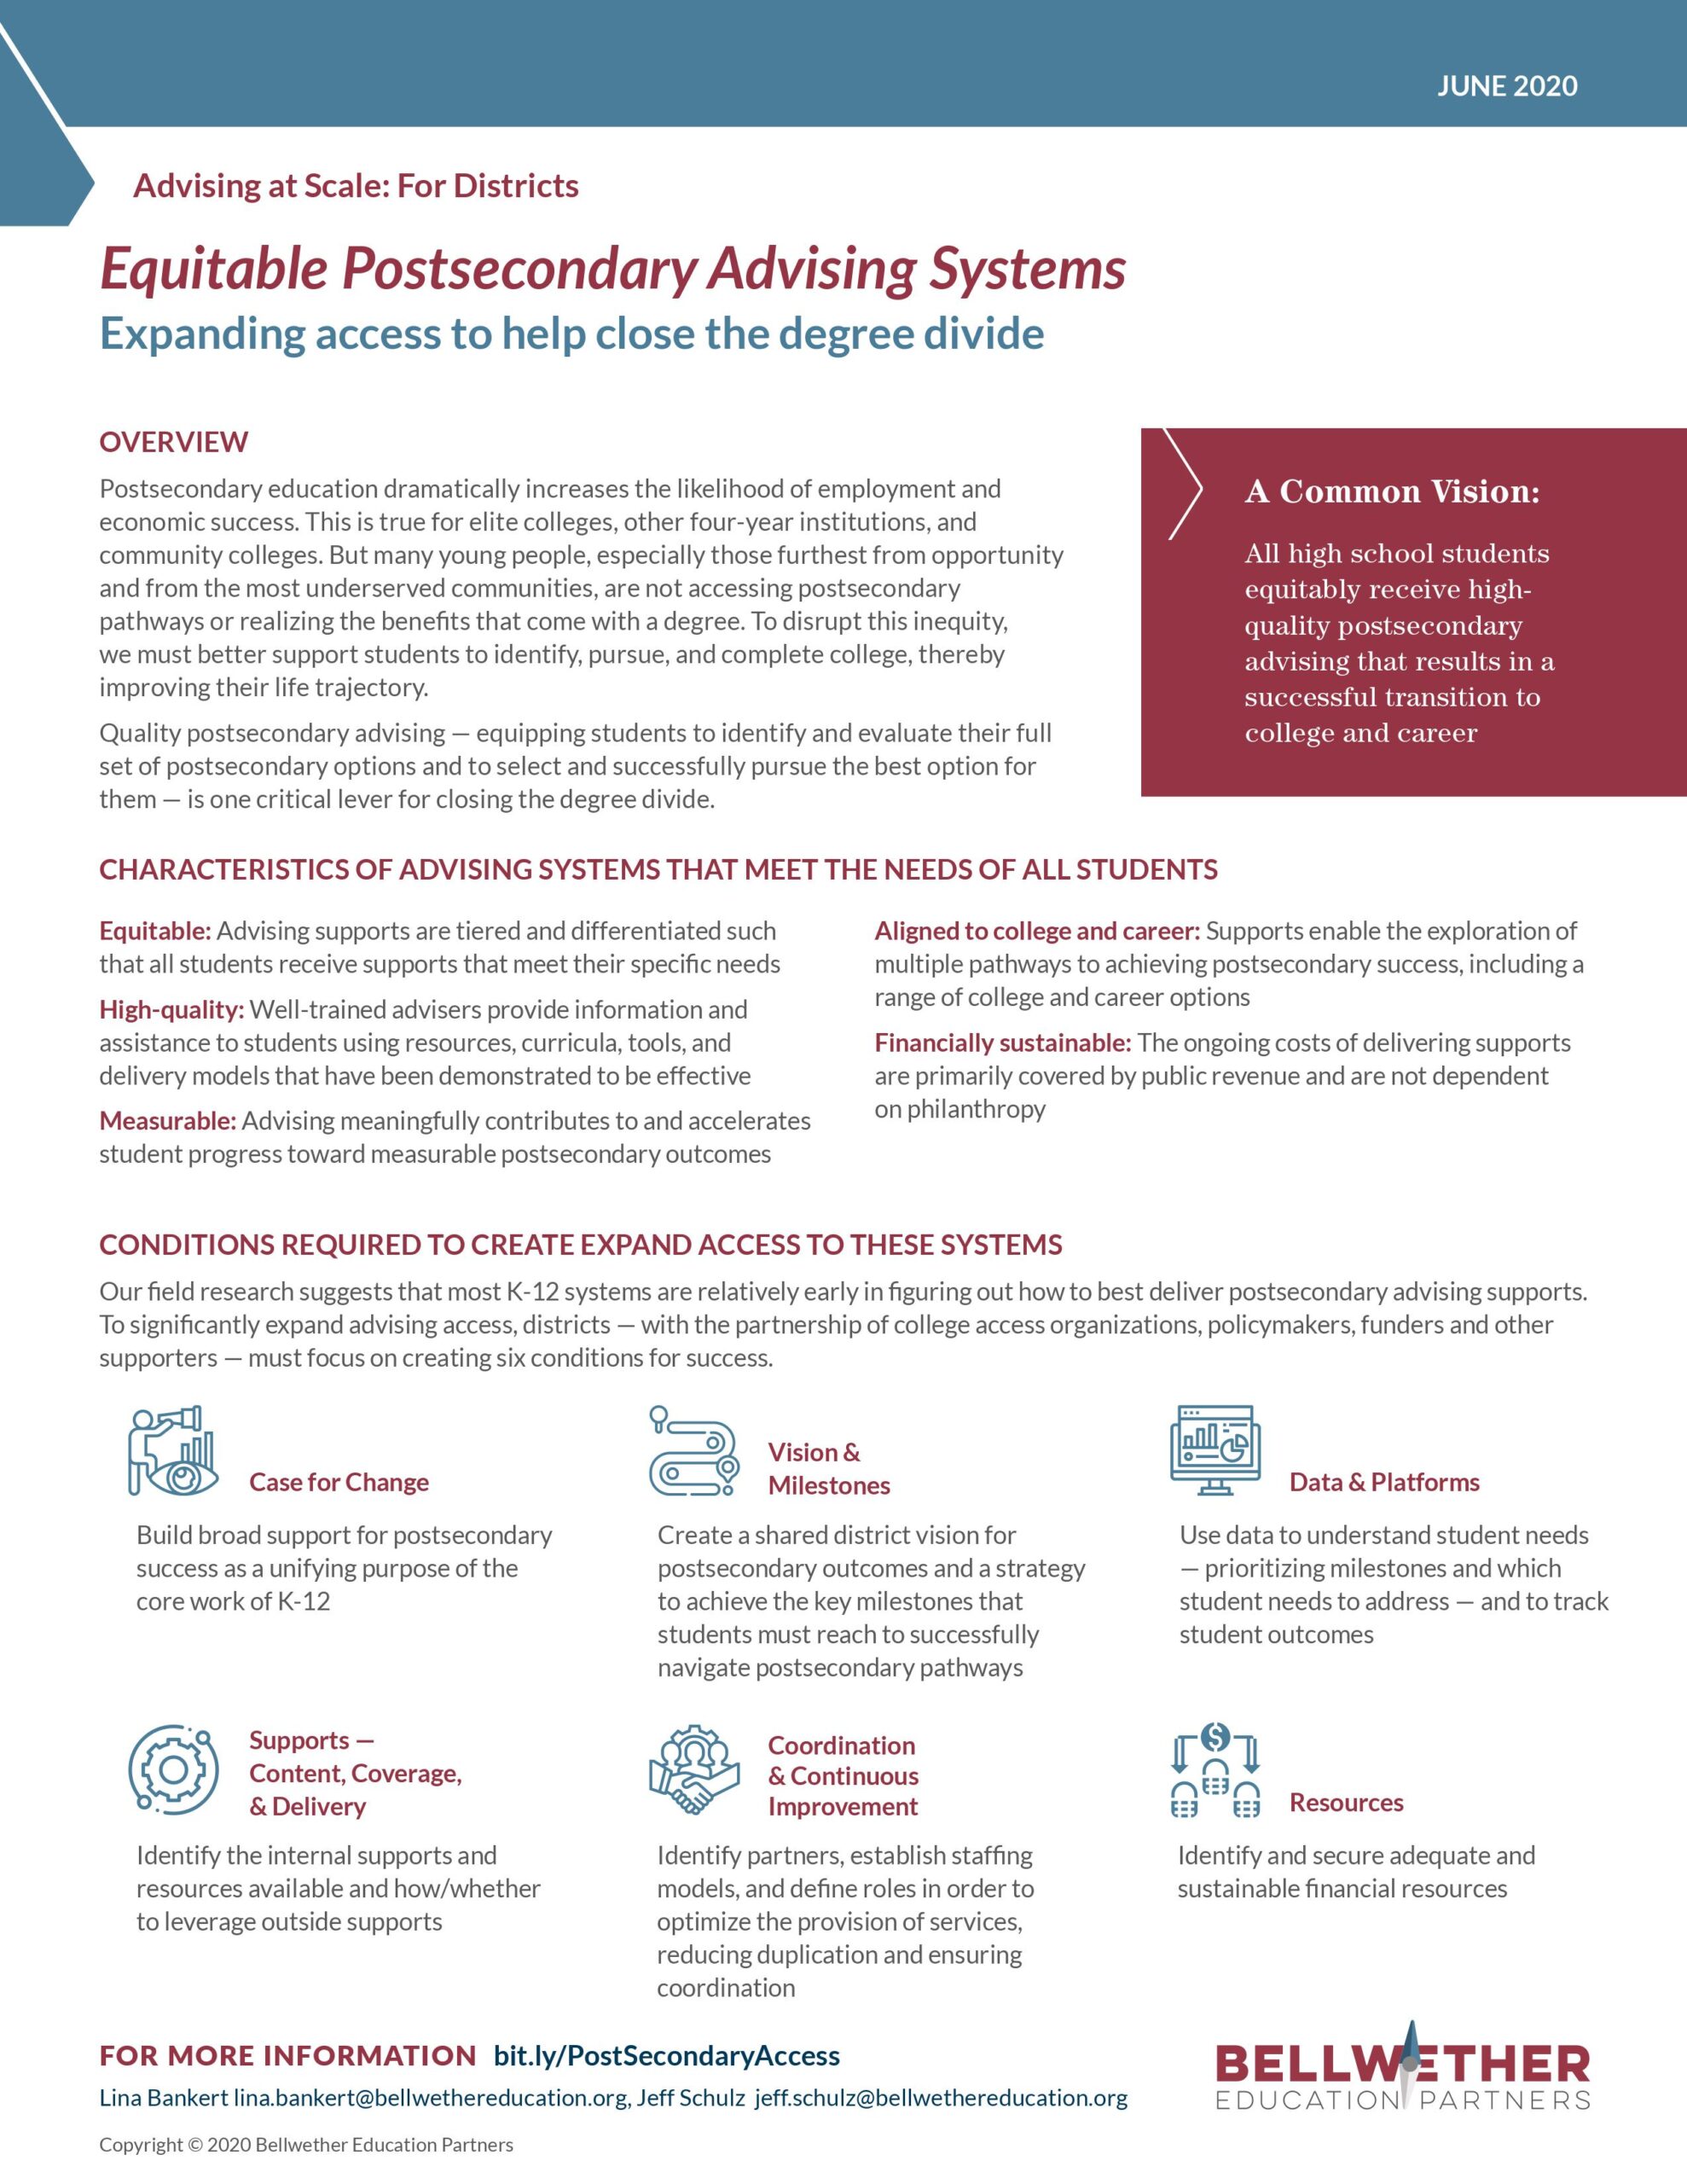 Cover of "Equitable Postsecondary Advising Systems Expanding access to help close the degree divide" tip sheet for districts, by Bellwether Education Partners June 2020